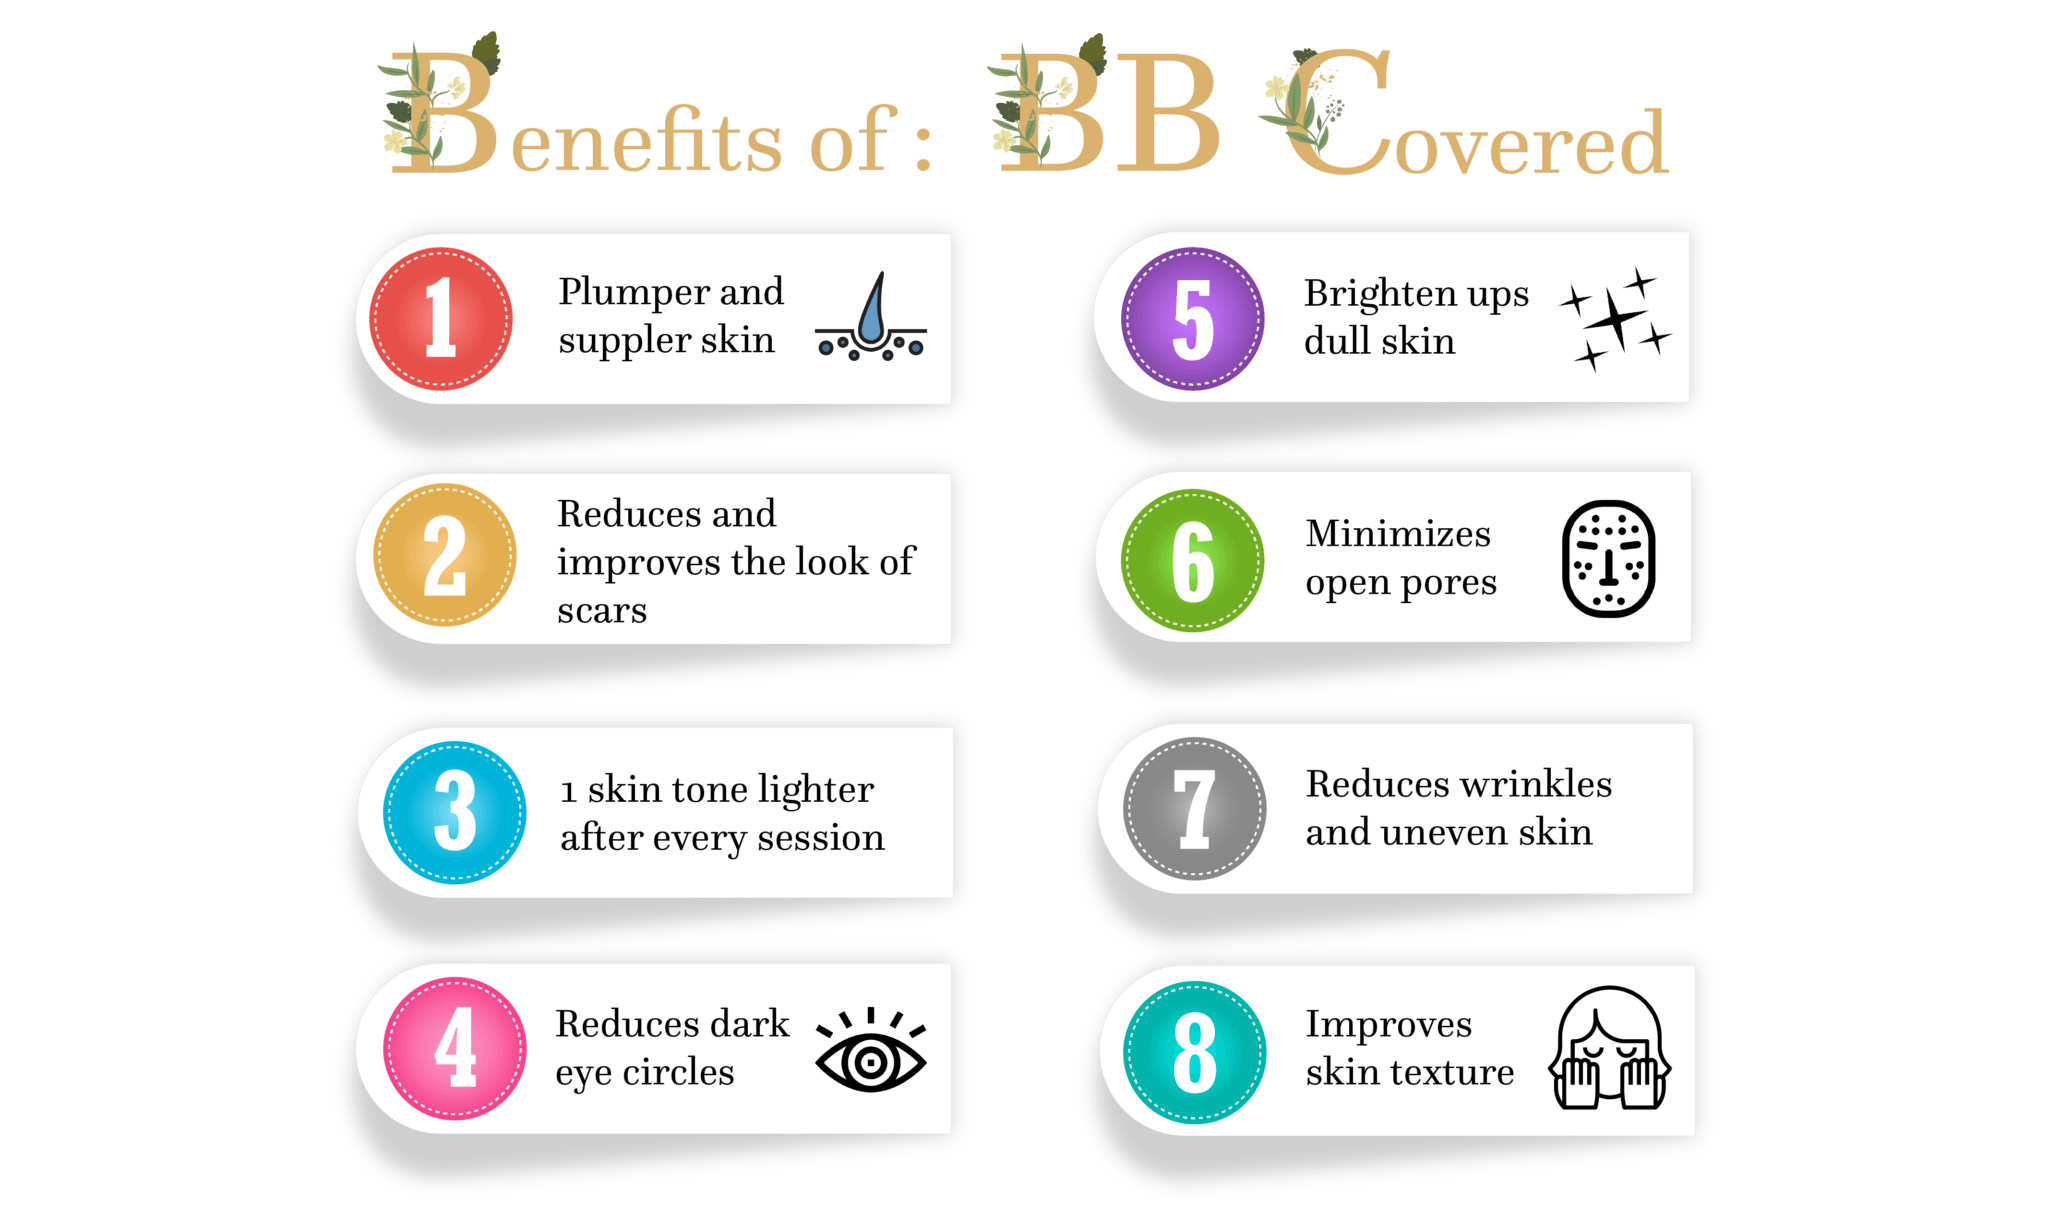 bb covered info 01 2048x1212 1